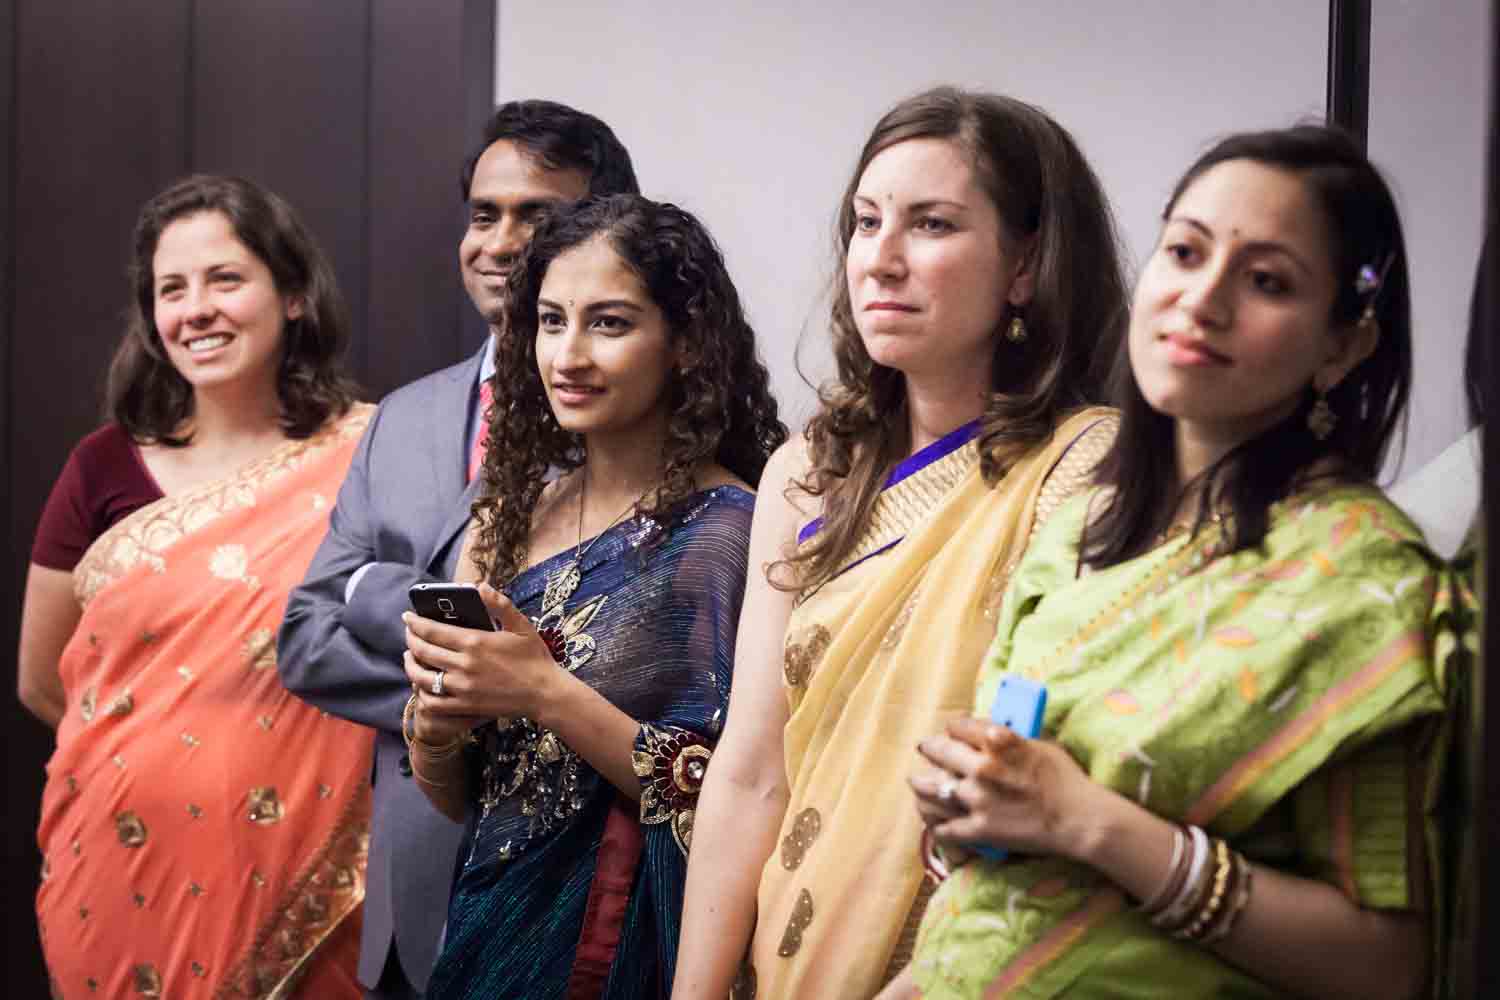 Guests wearing Indian saris listening to ceremony at a NYC City Hall Indian wedding